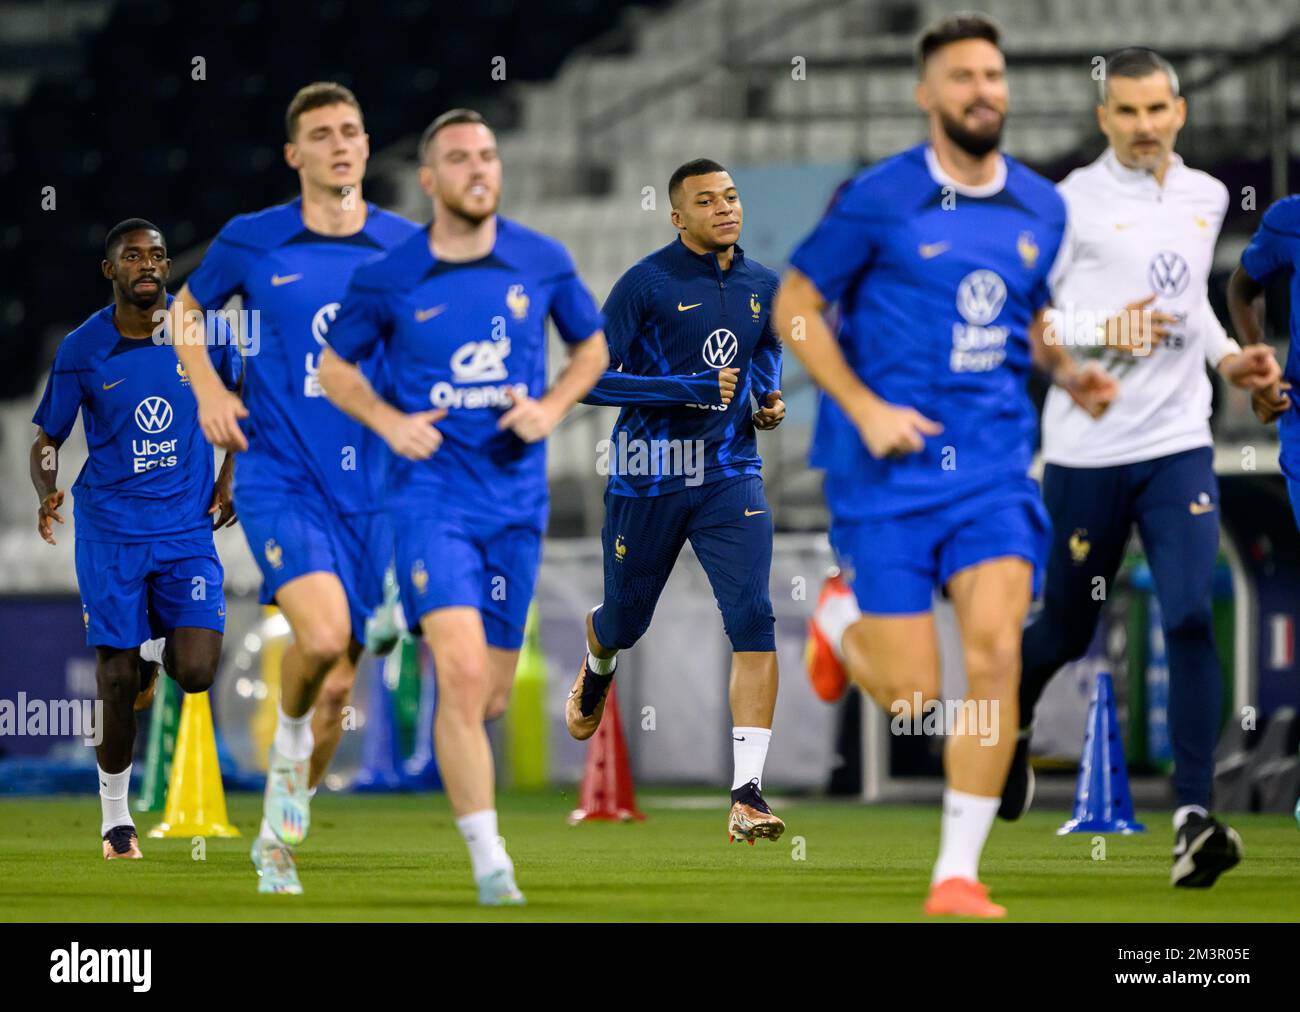 Doha, Qatar. 16th Dec, 2022. Soccer: World Cup, Before the final Argentina - France, training France at Al Sadd SC stadium. France's Kylian Mbappe (M) runs across the pitch with his teammates. Credit: Robert Michael/dpa - IMPORTANT NOTE: In accordance with the requirements of the DFL Deutsche Fußball Liga and the DFB Deutscher Fußball-Bund, it is prohibited to use or have used photographs taken in the stadium and/or of the match in the form of sequence pictures and/or video-like photo series./dpa/Alamy Live News Stock Photo